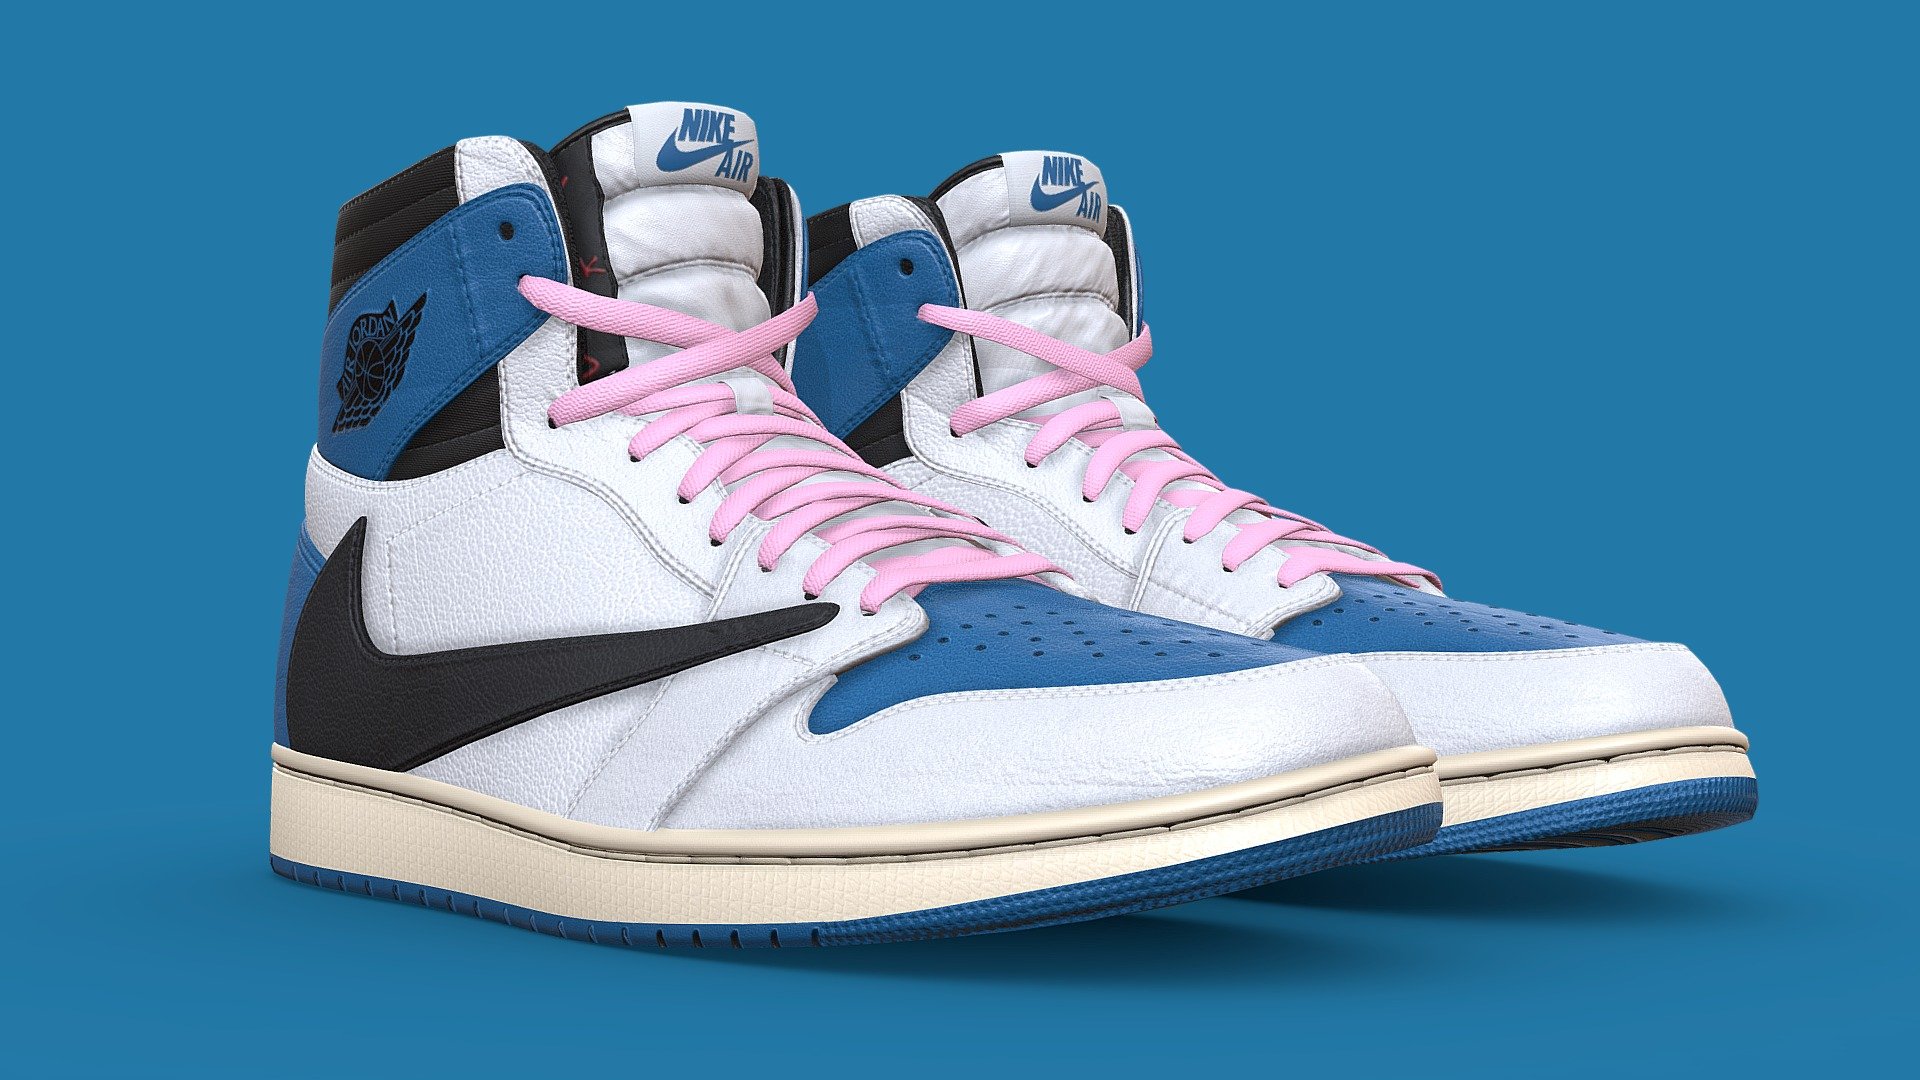 Game Ready, optimized version of my Travis Scott x Fragment Jordan 1 shoe

This Low Poly version is included in the full version available here:
https://sketchfab.com/3d-models/jordan-1-travis-scott-x-fragment-7007b36ecf9c4897b532bffabe432162

This version features an optimized mesh. High Poly detail on the sole has been replaced with a baked normal map and the rest of the model has been streamlined to reduce the polycount. 

The model uses just one texture set. Black, White, and Blue coloured laces are included as seperate base color files in the additional files, - Jordan 1 Travis Scott x Fragment Game Ready - Buy Royalty Free 3D model by Joe-Wall (@joewall) 3d model